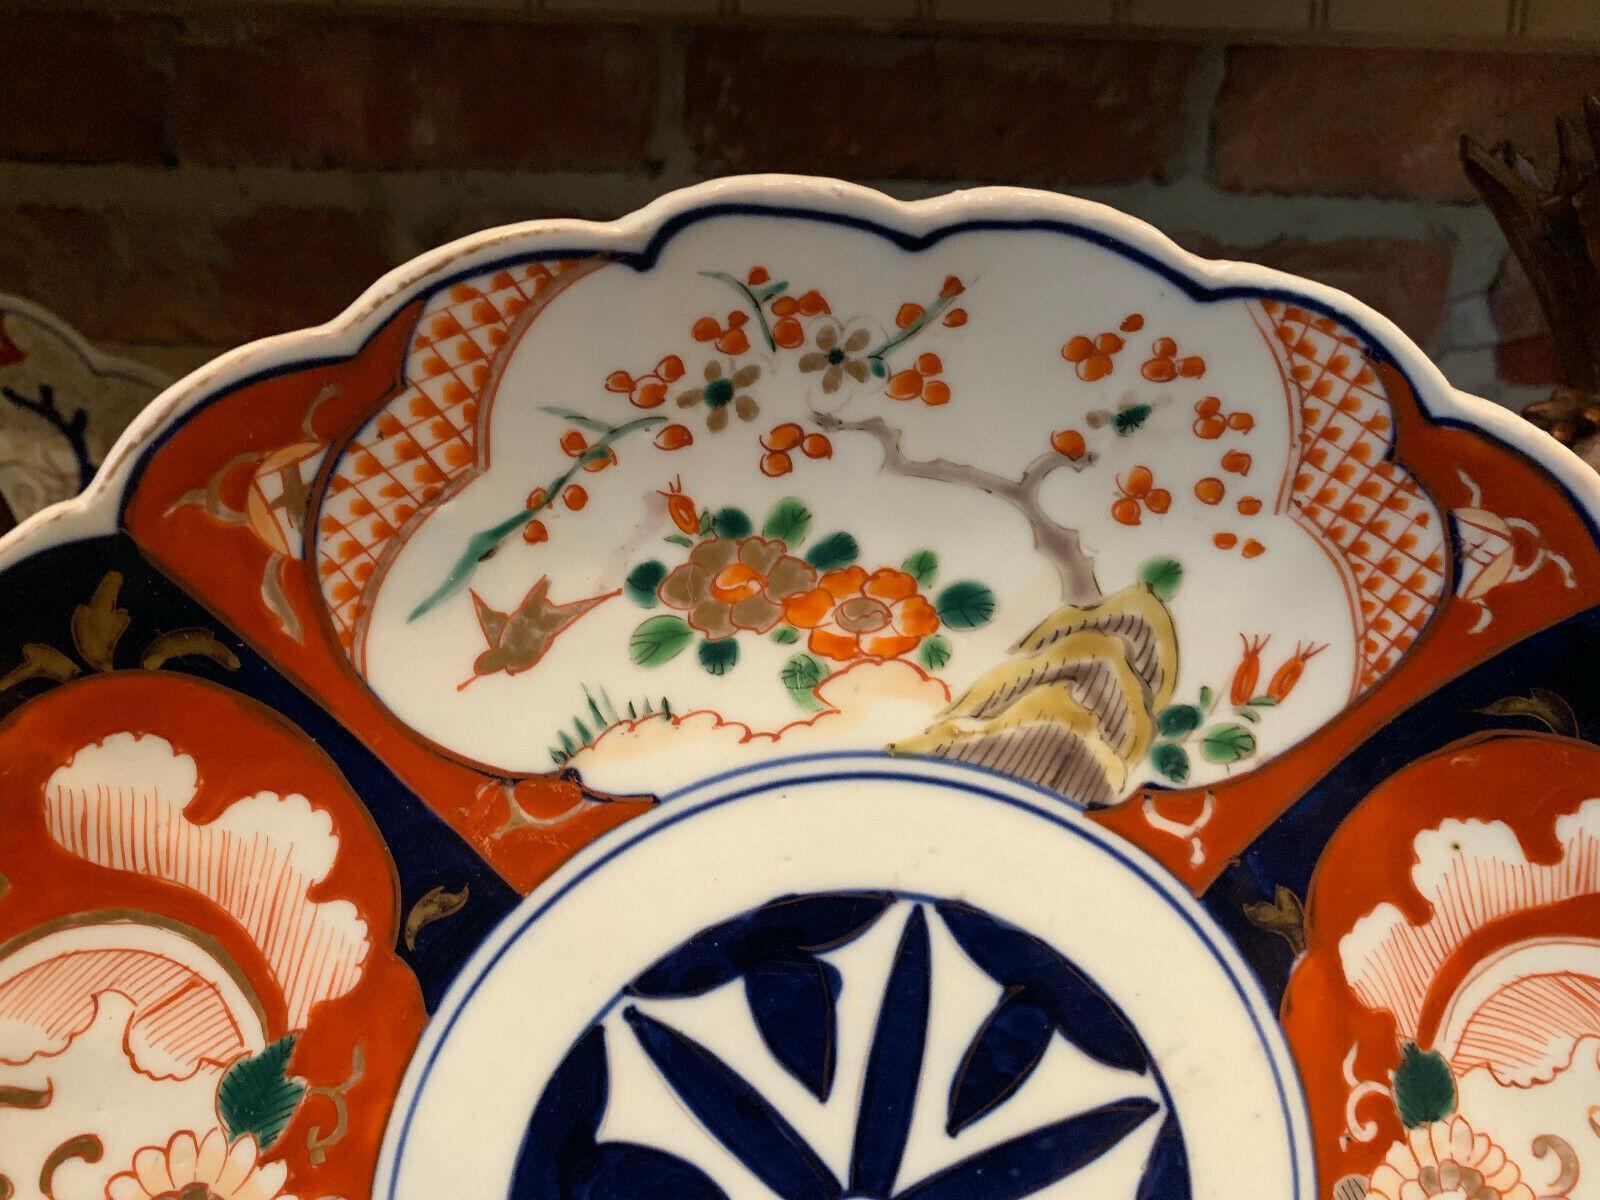 Unknown 19th Century Imari China Scalloped Charger Plate Porcelain Japanese Export